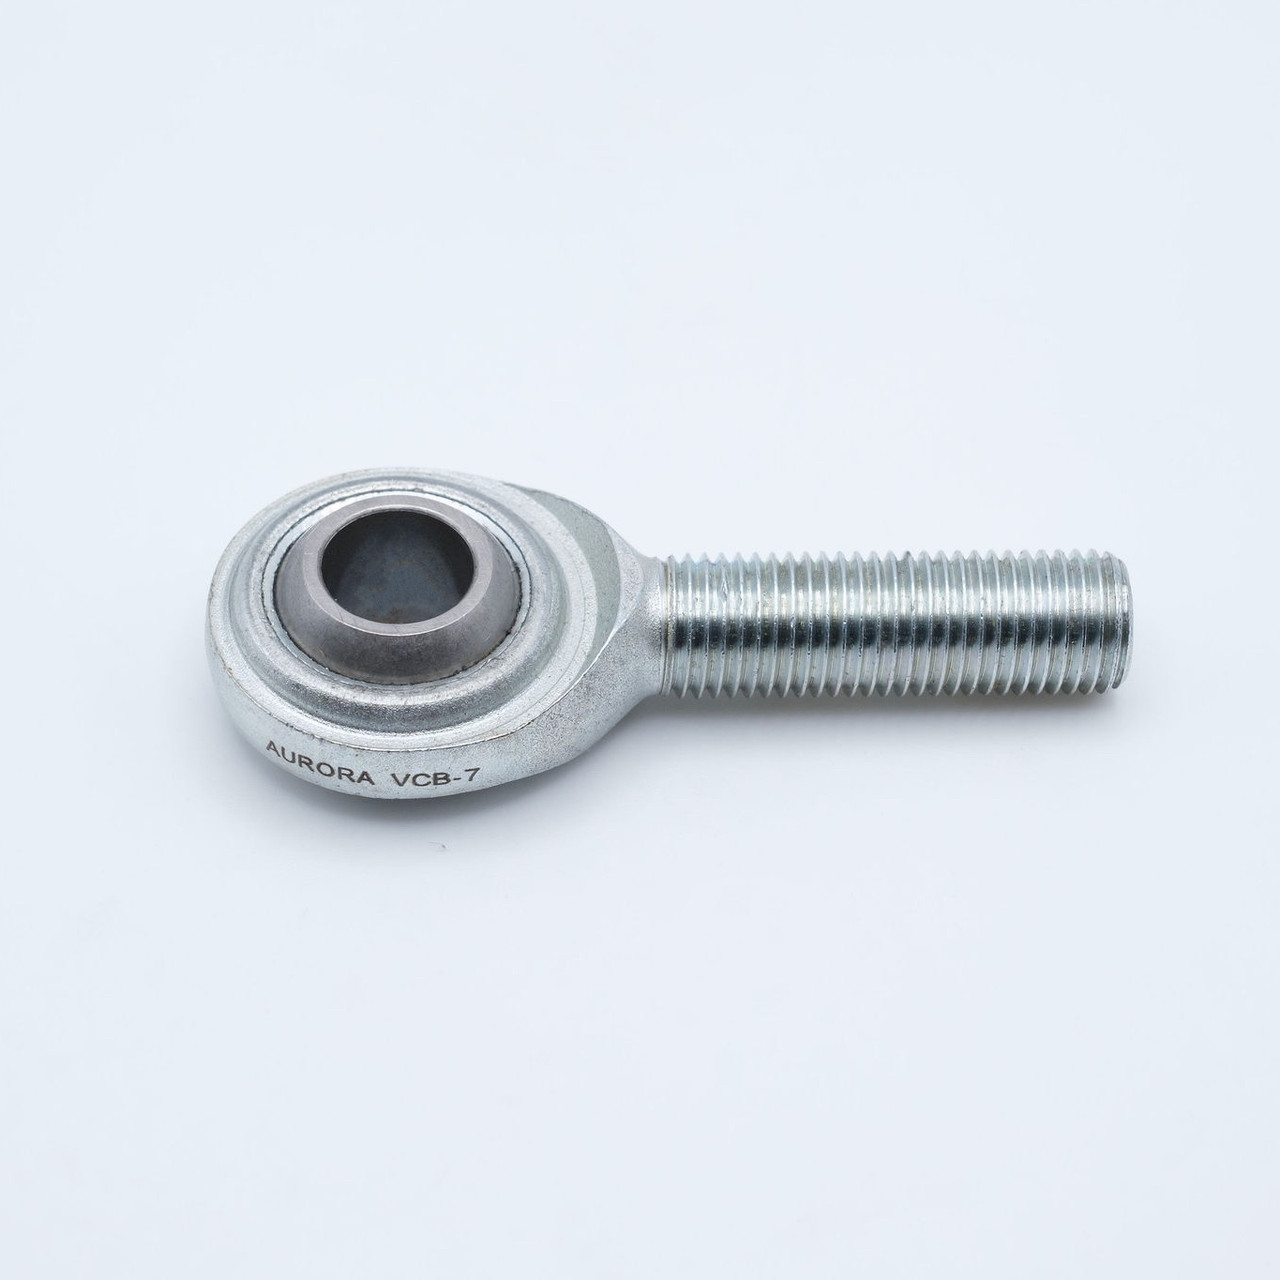 VCB-7 Male Rod-End Bearing Right Hand 7/16" Bore Left Side View